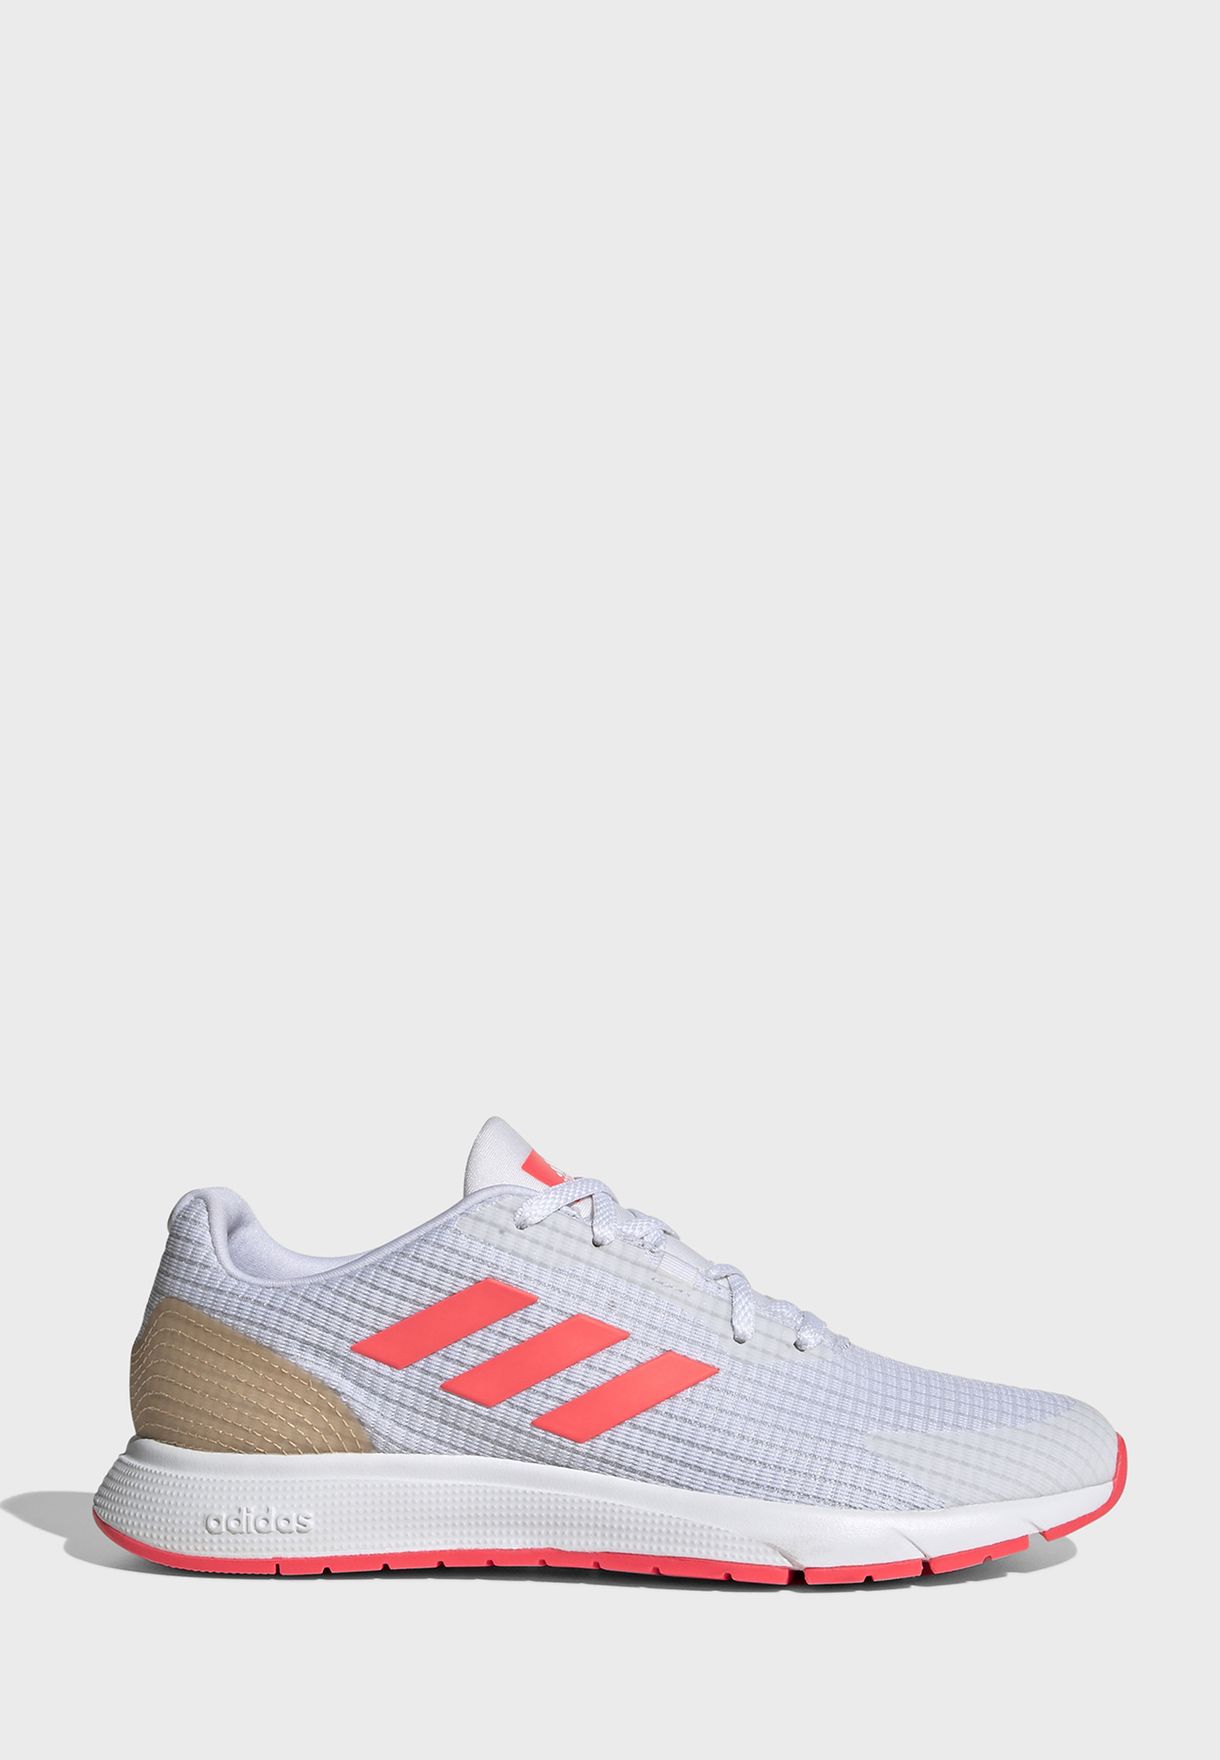 adidas multicolor womens shoes